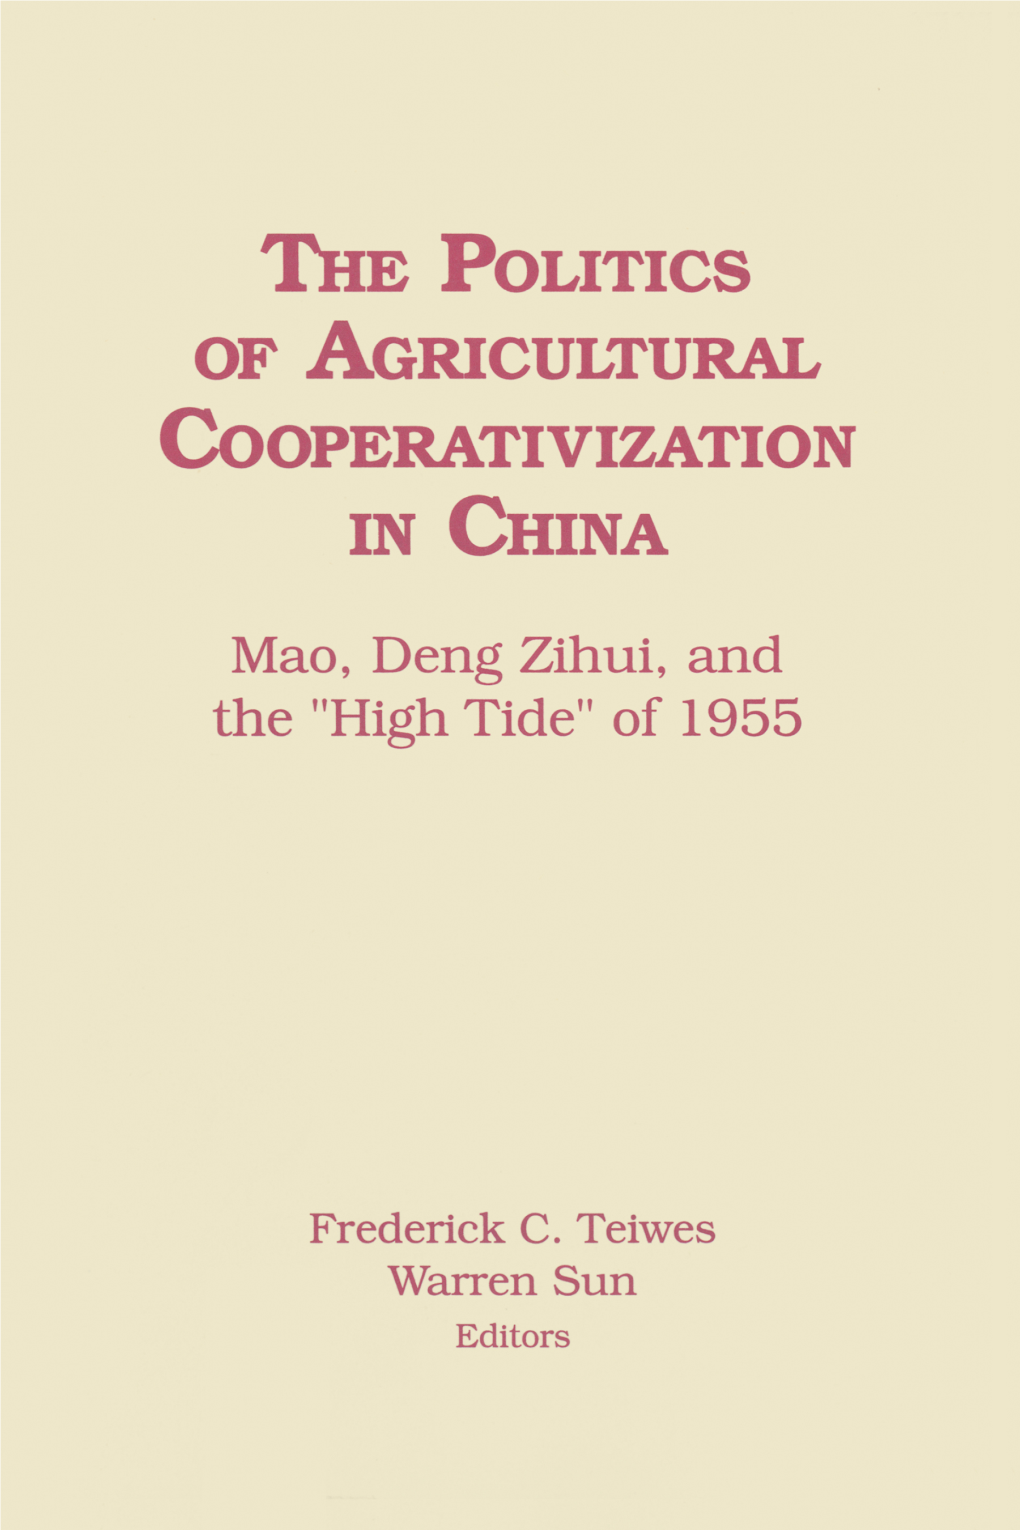 The Politics of Agricultural Cooperativization in China: Mao